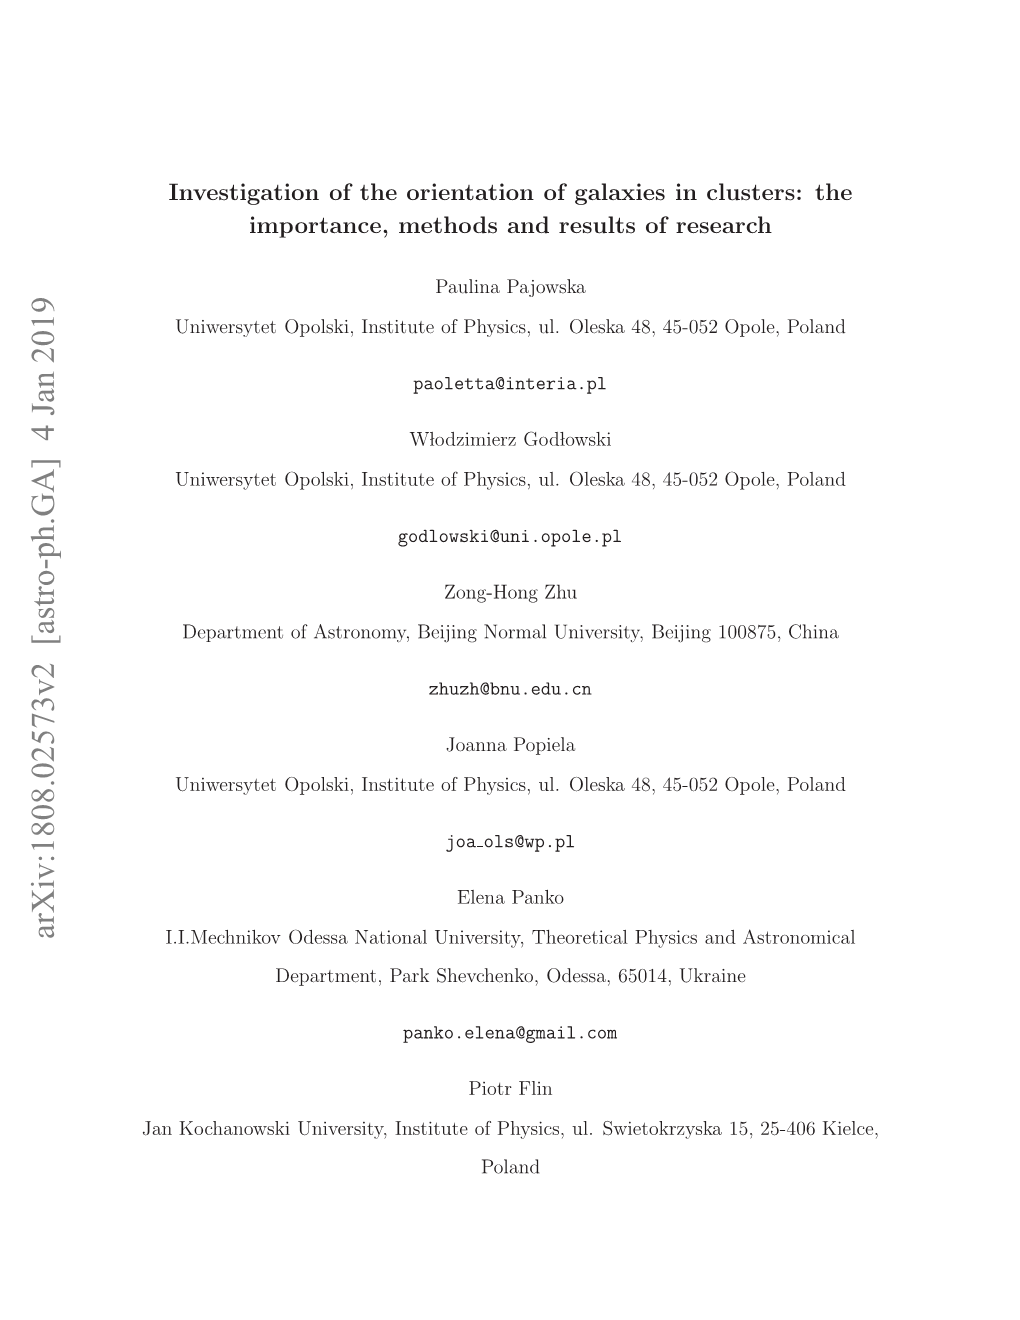 Investigation of the Orientation of Galaxies in Clusters: the Importance, Methods and Results of Research